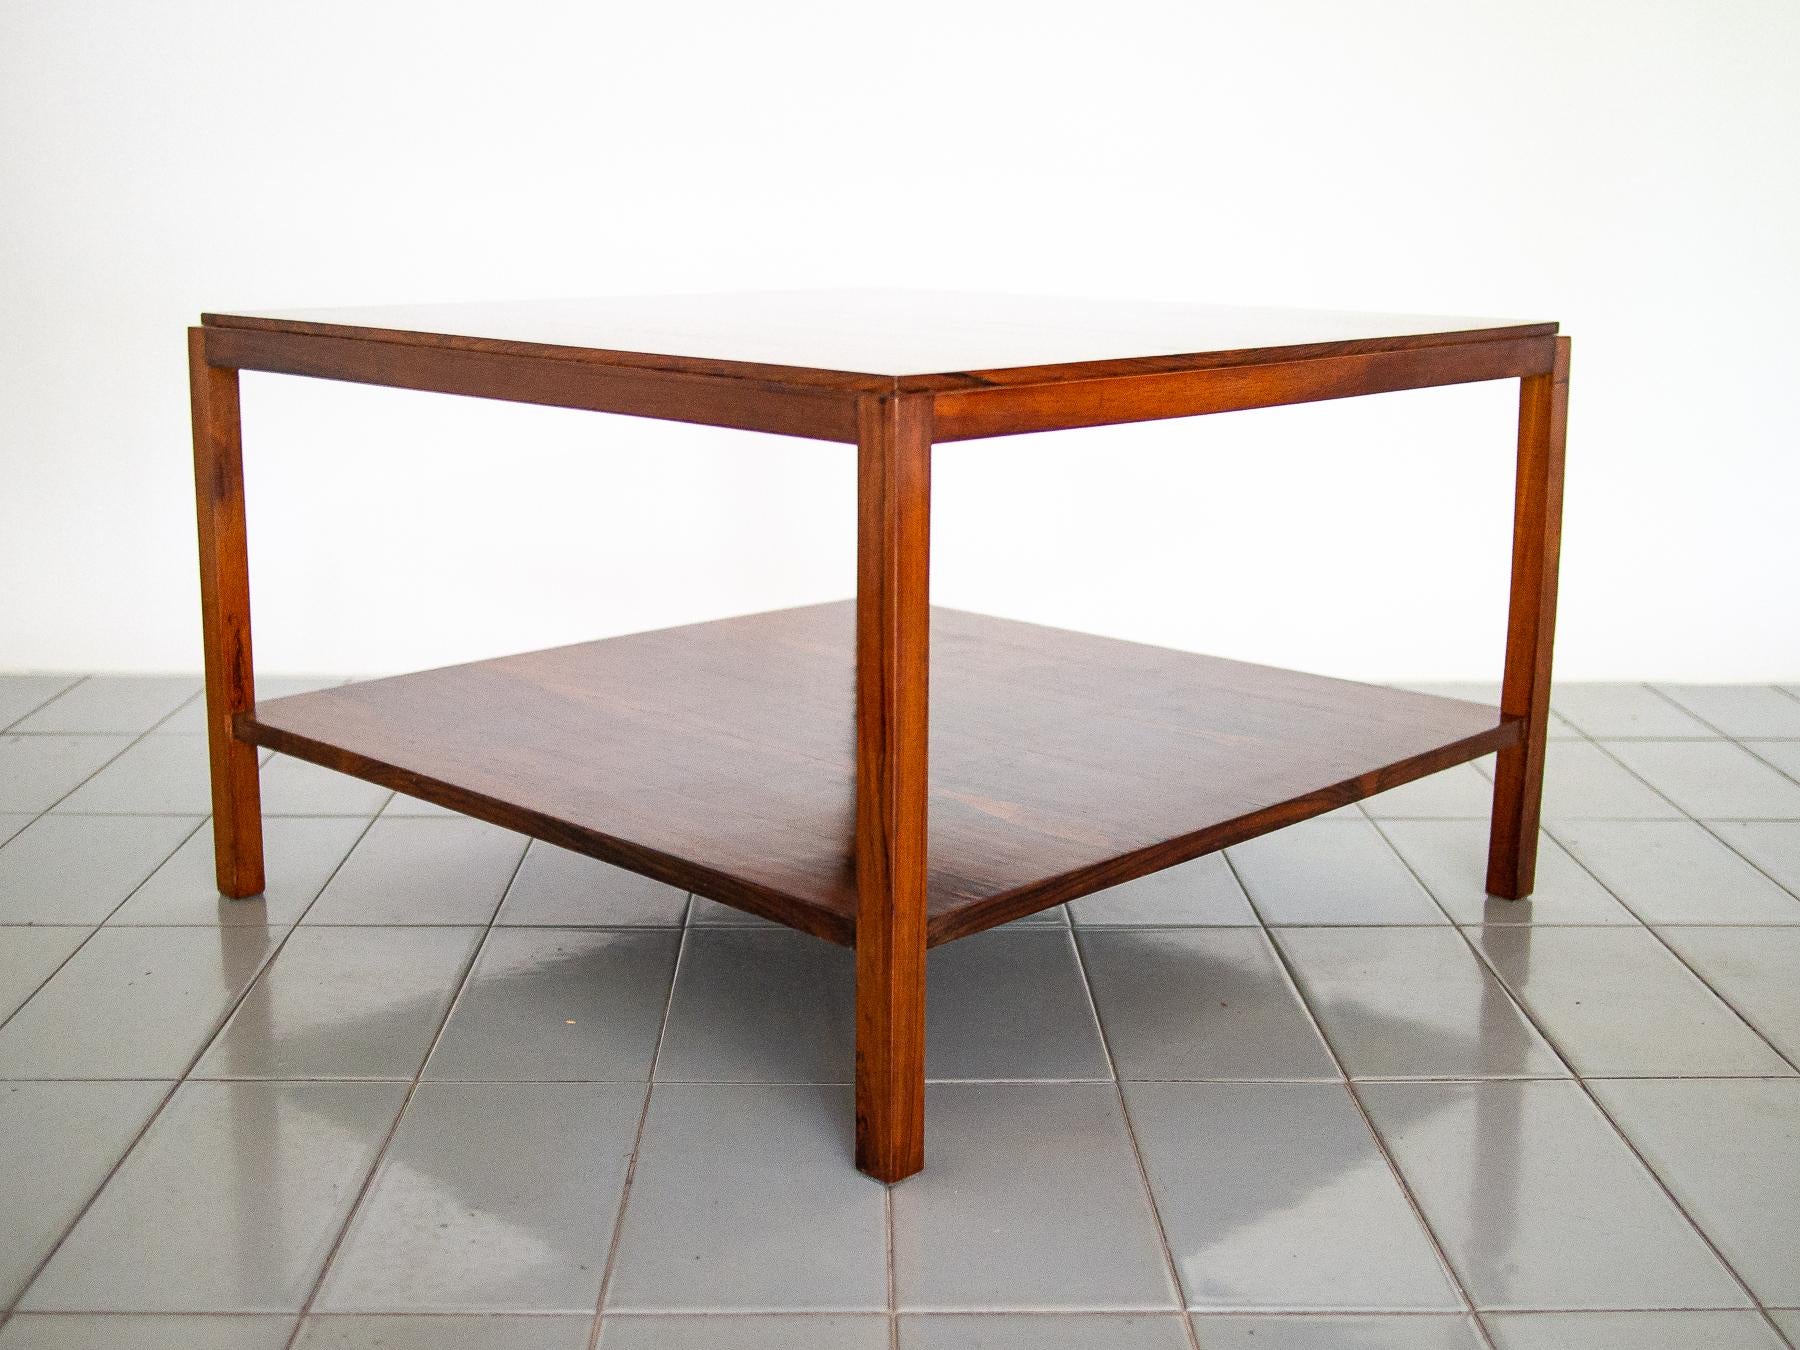 1950s Square Side Table in Rosewood by Sergio Rodrigues, Brazilian Modernism 7